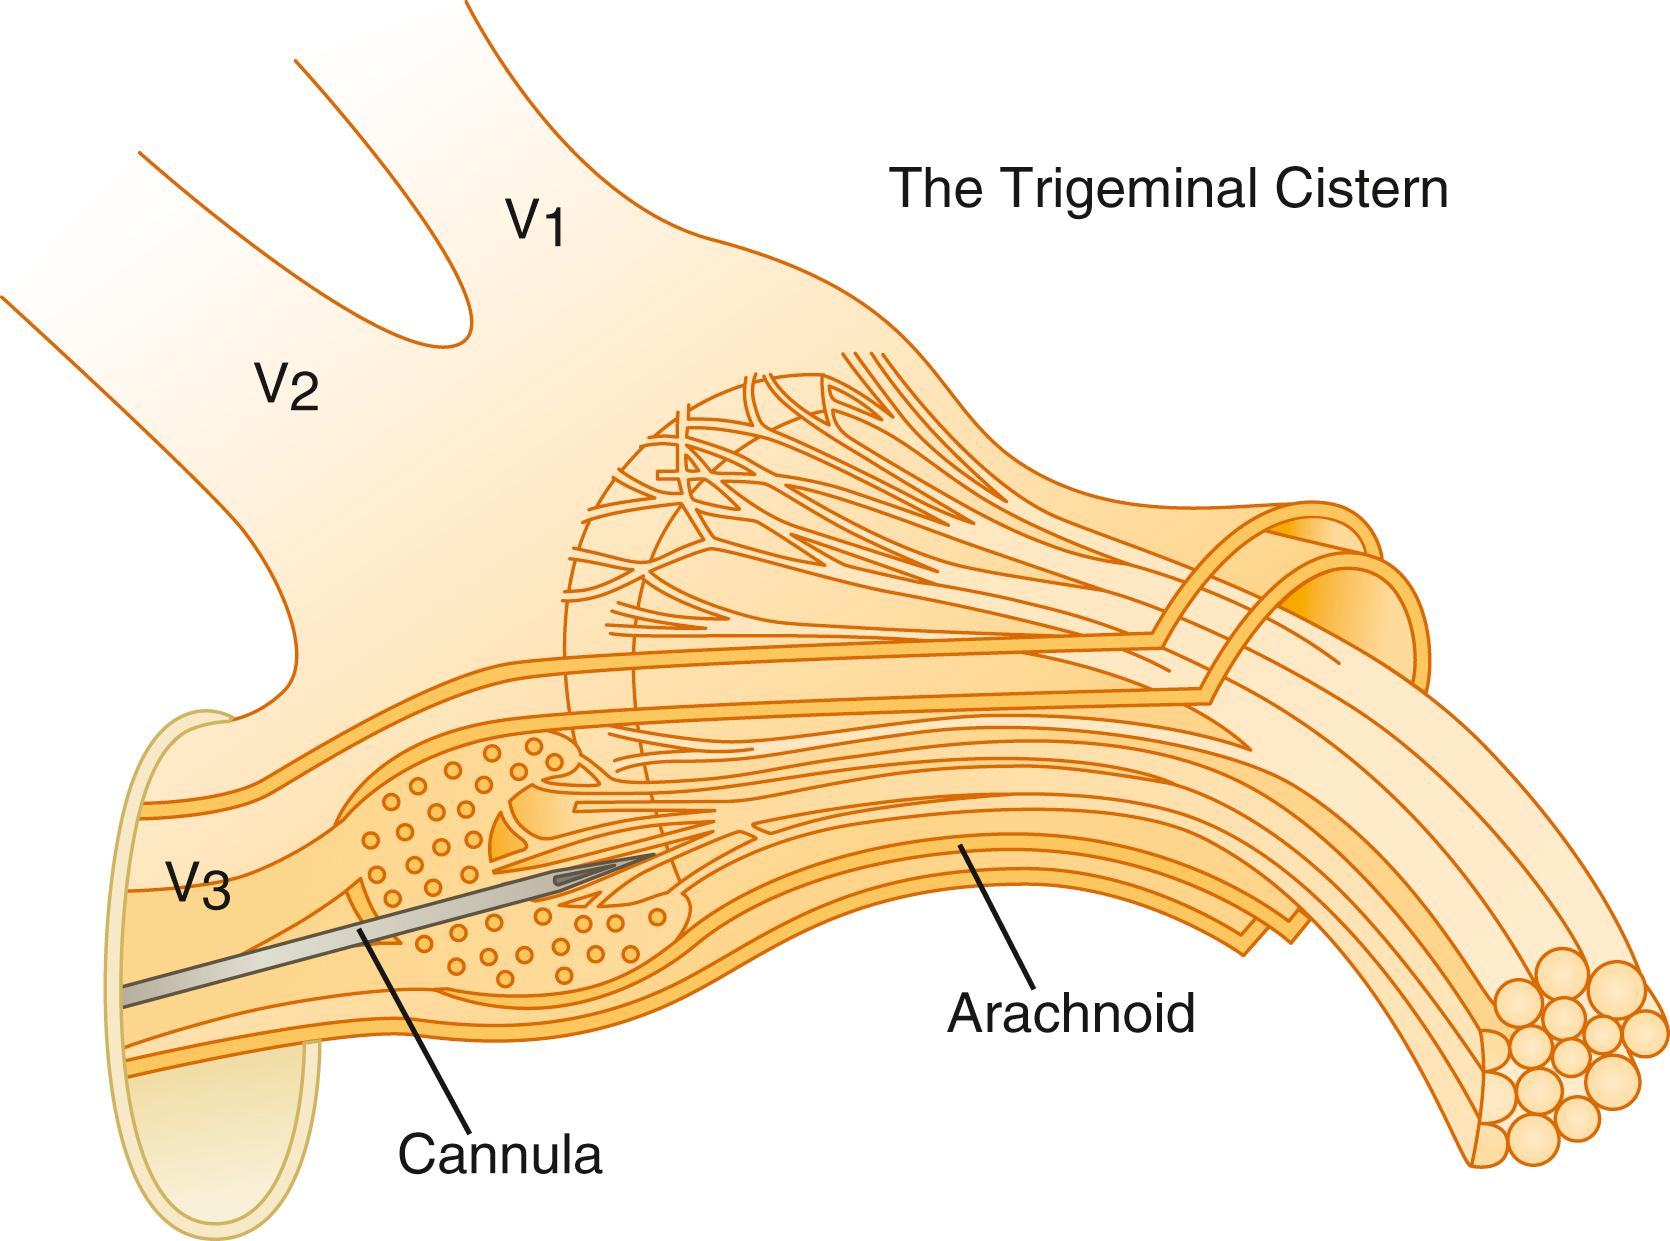 FIGURE 114.1, Schematic picture illustrating the contents of the Meckel cave: the Gasserian ganglion, the retroganglionic root fibers in the cerebrospinal fluid–filled cistern, and the meningeal coverings. A needle is penetrating the ganglion, entering the cistern.